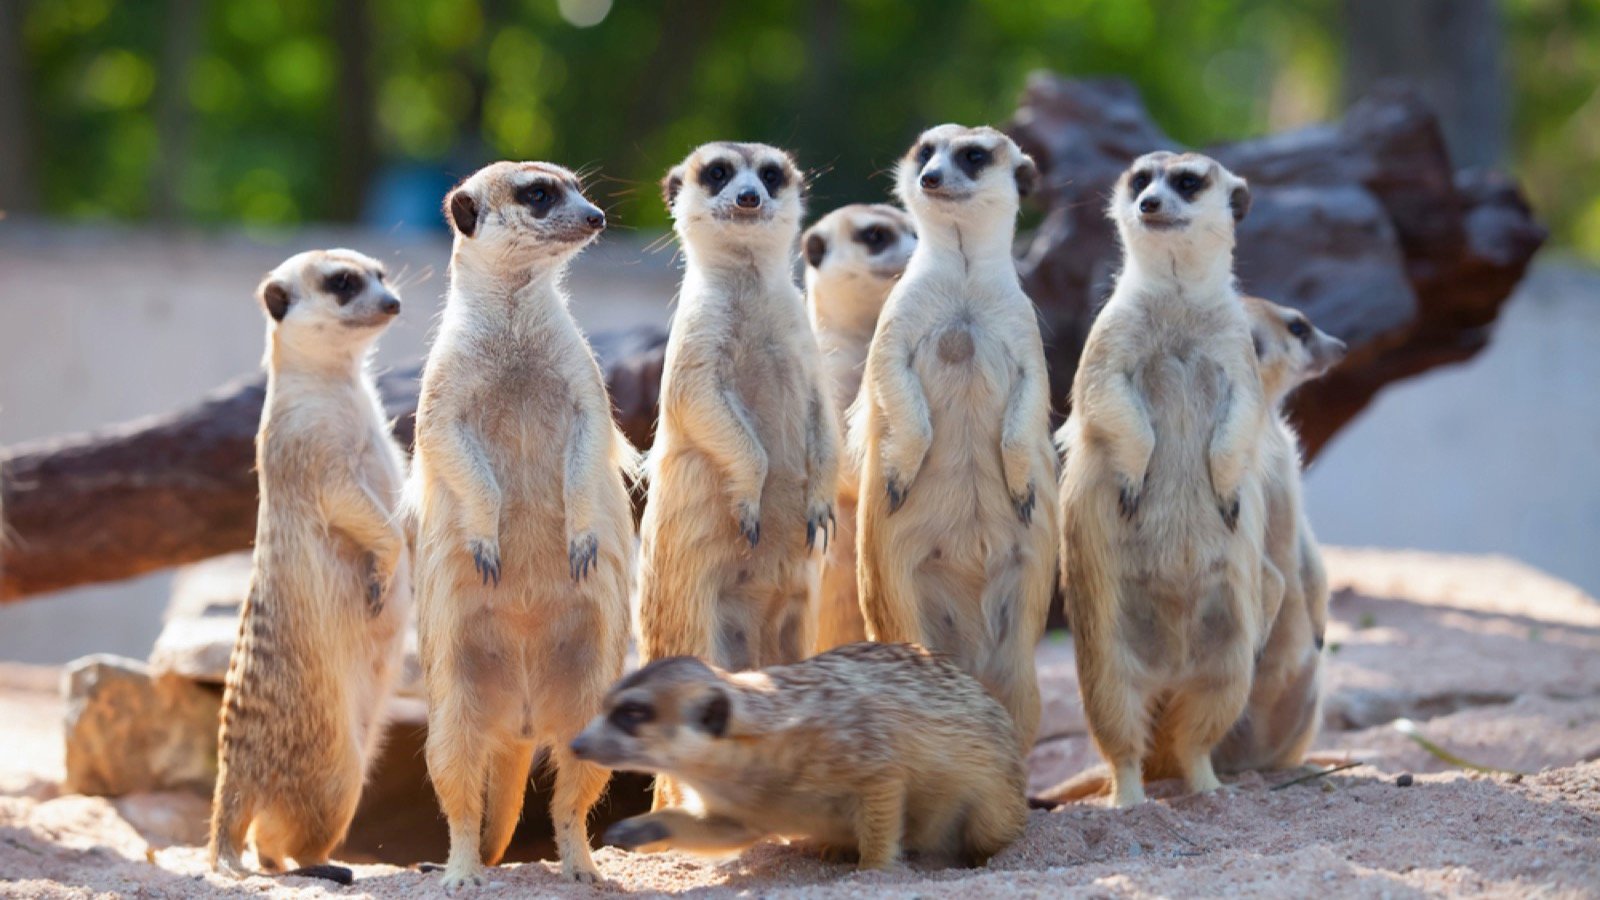 <p>Meerkats are adorable, and in this location, prepare for these cute and <a href="https://www.kindafrugal.com/curious-creatures-16-rare-animals-few-have-laid-eyes-on/">curious creatures</a> to crawl onto your lap. Meerkats live in groups of up to 40 and thrive in the dry, unyielding regions of Botswana and South Africa.</p><p>These animals are famous for their standing “look out” pose, so don’t be surprised if you become a convenient post if you get close to the meerkat burrows.</p>